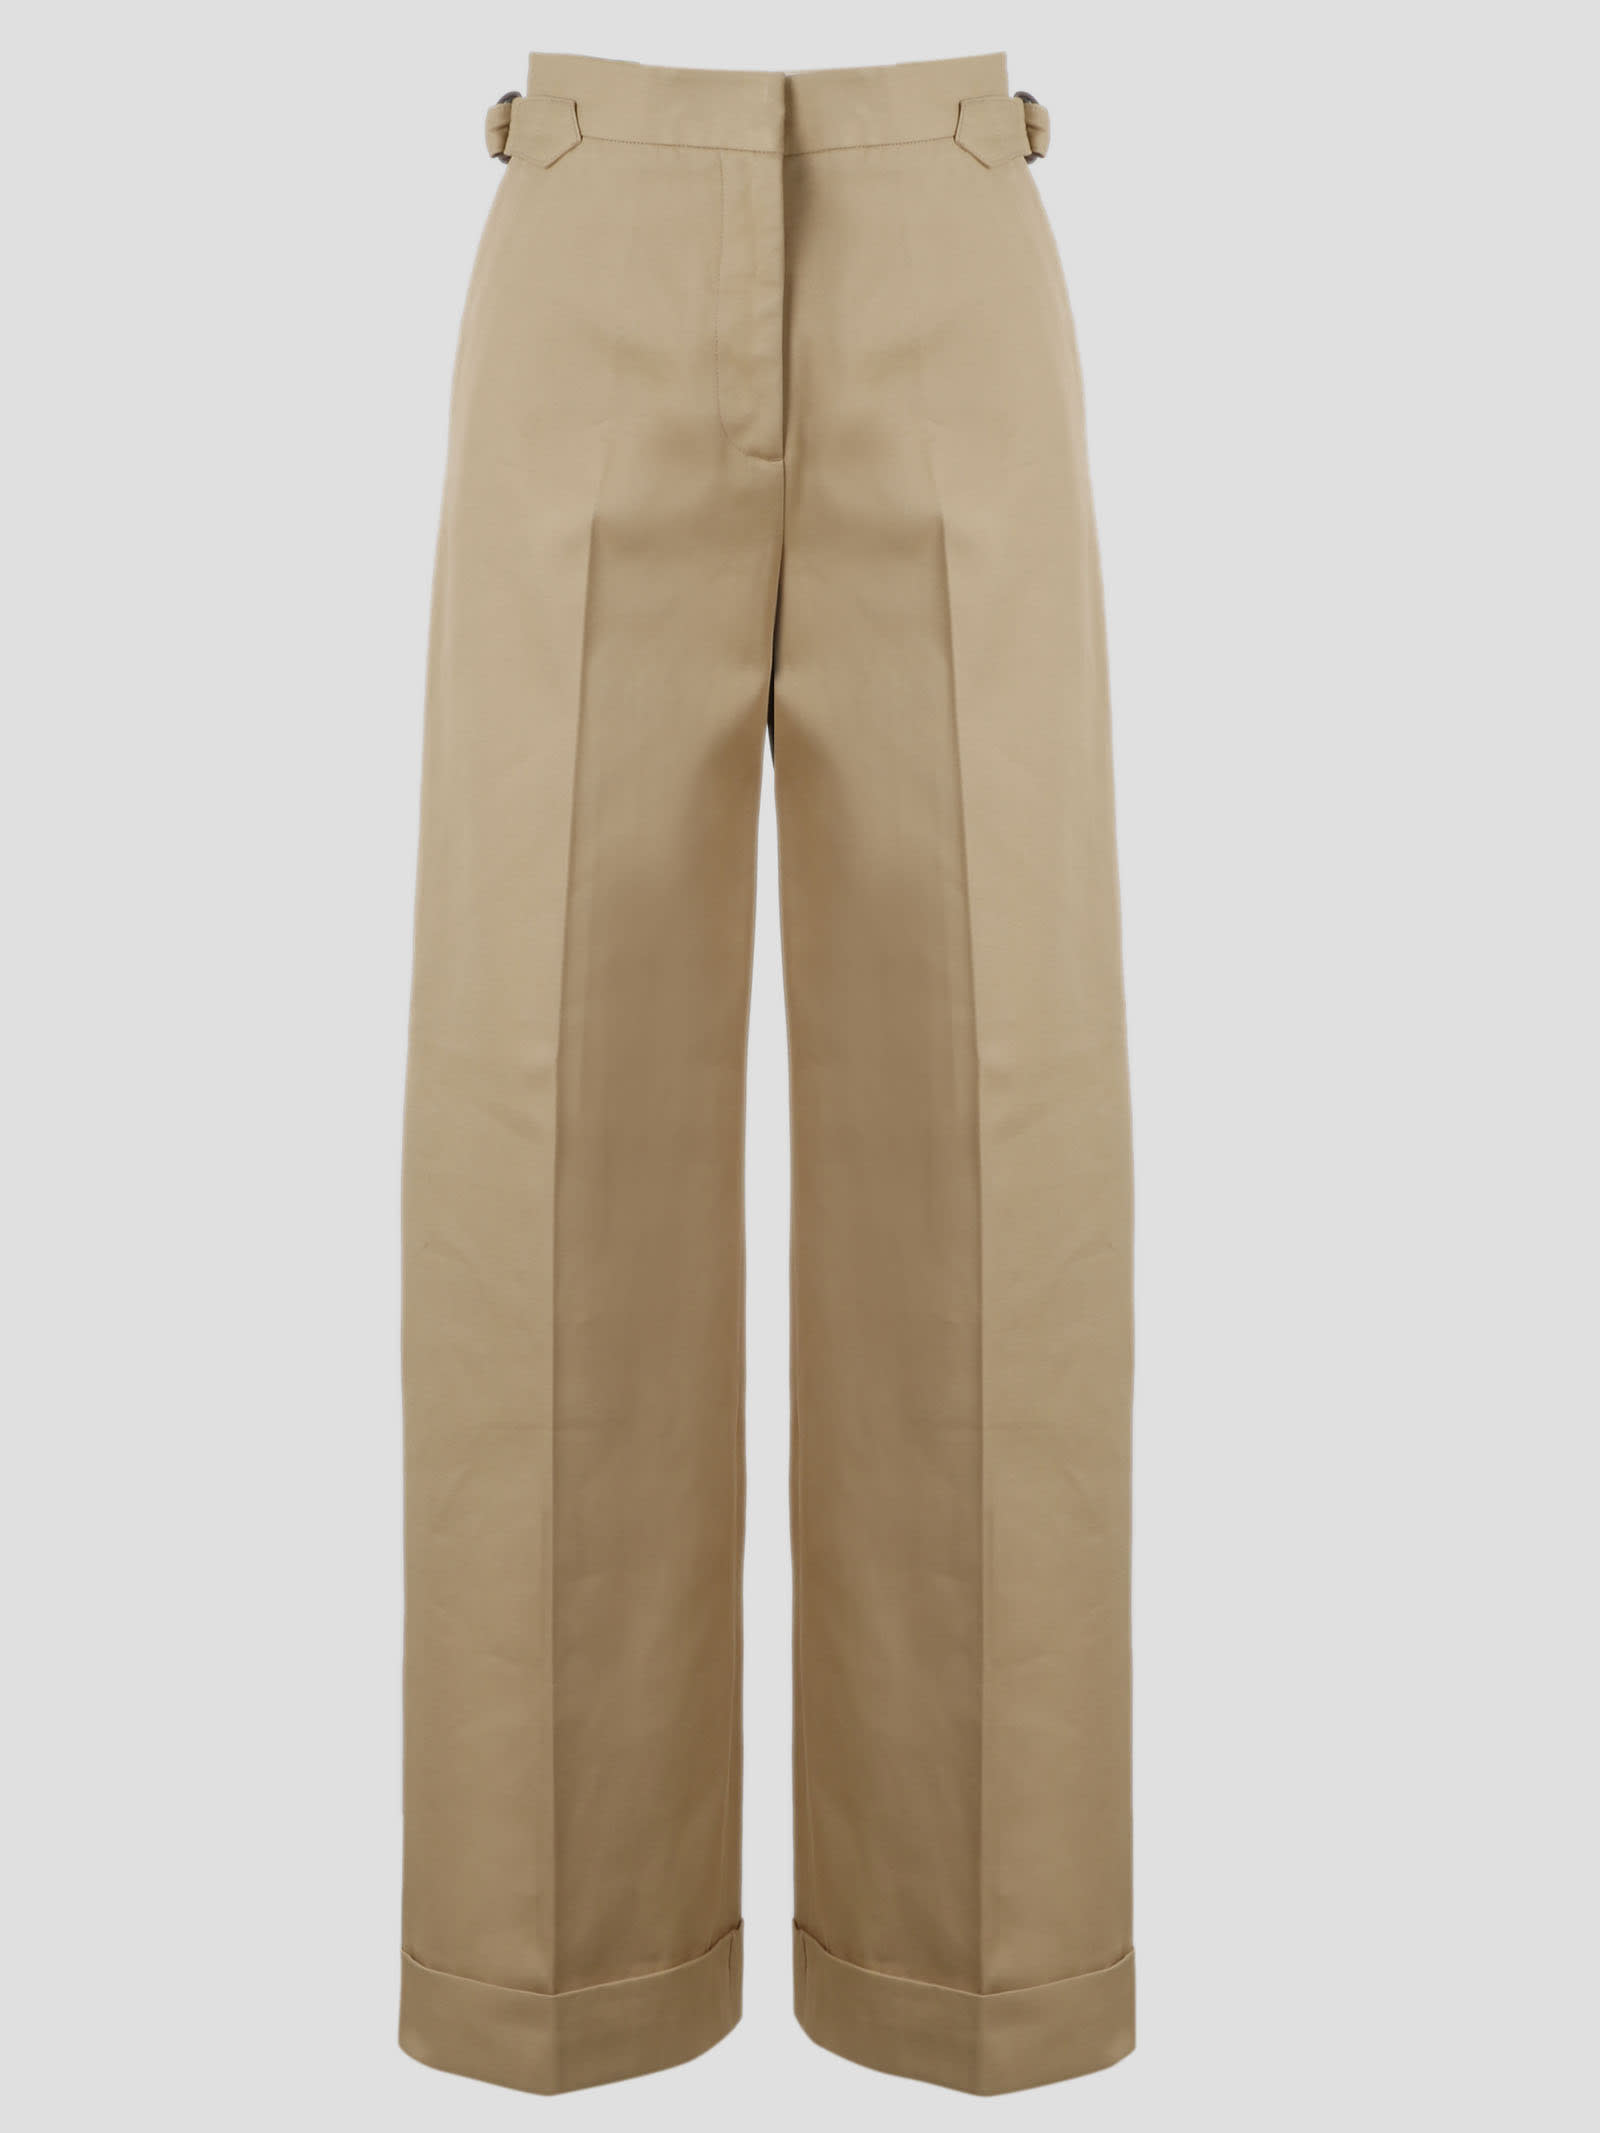 SEE BY CHLOÉ WIDE CUFFED TROUSERS